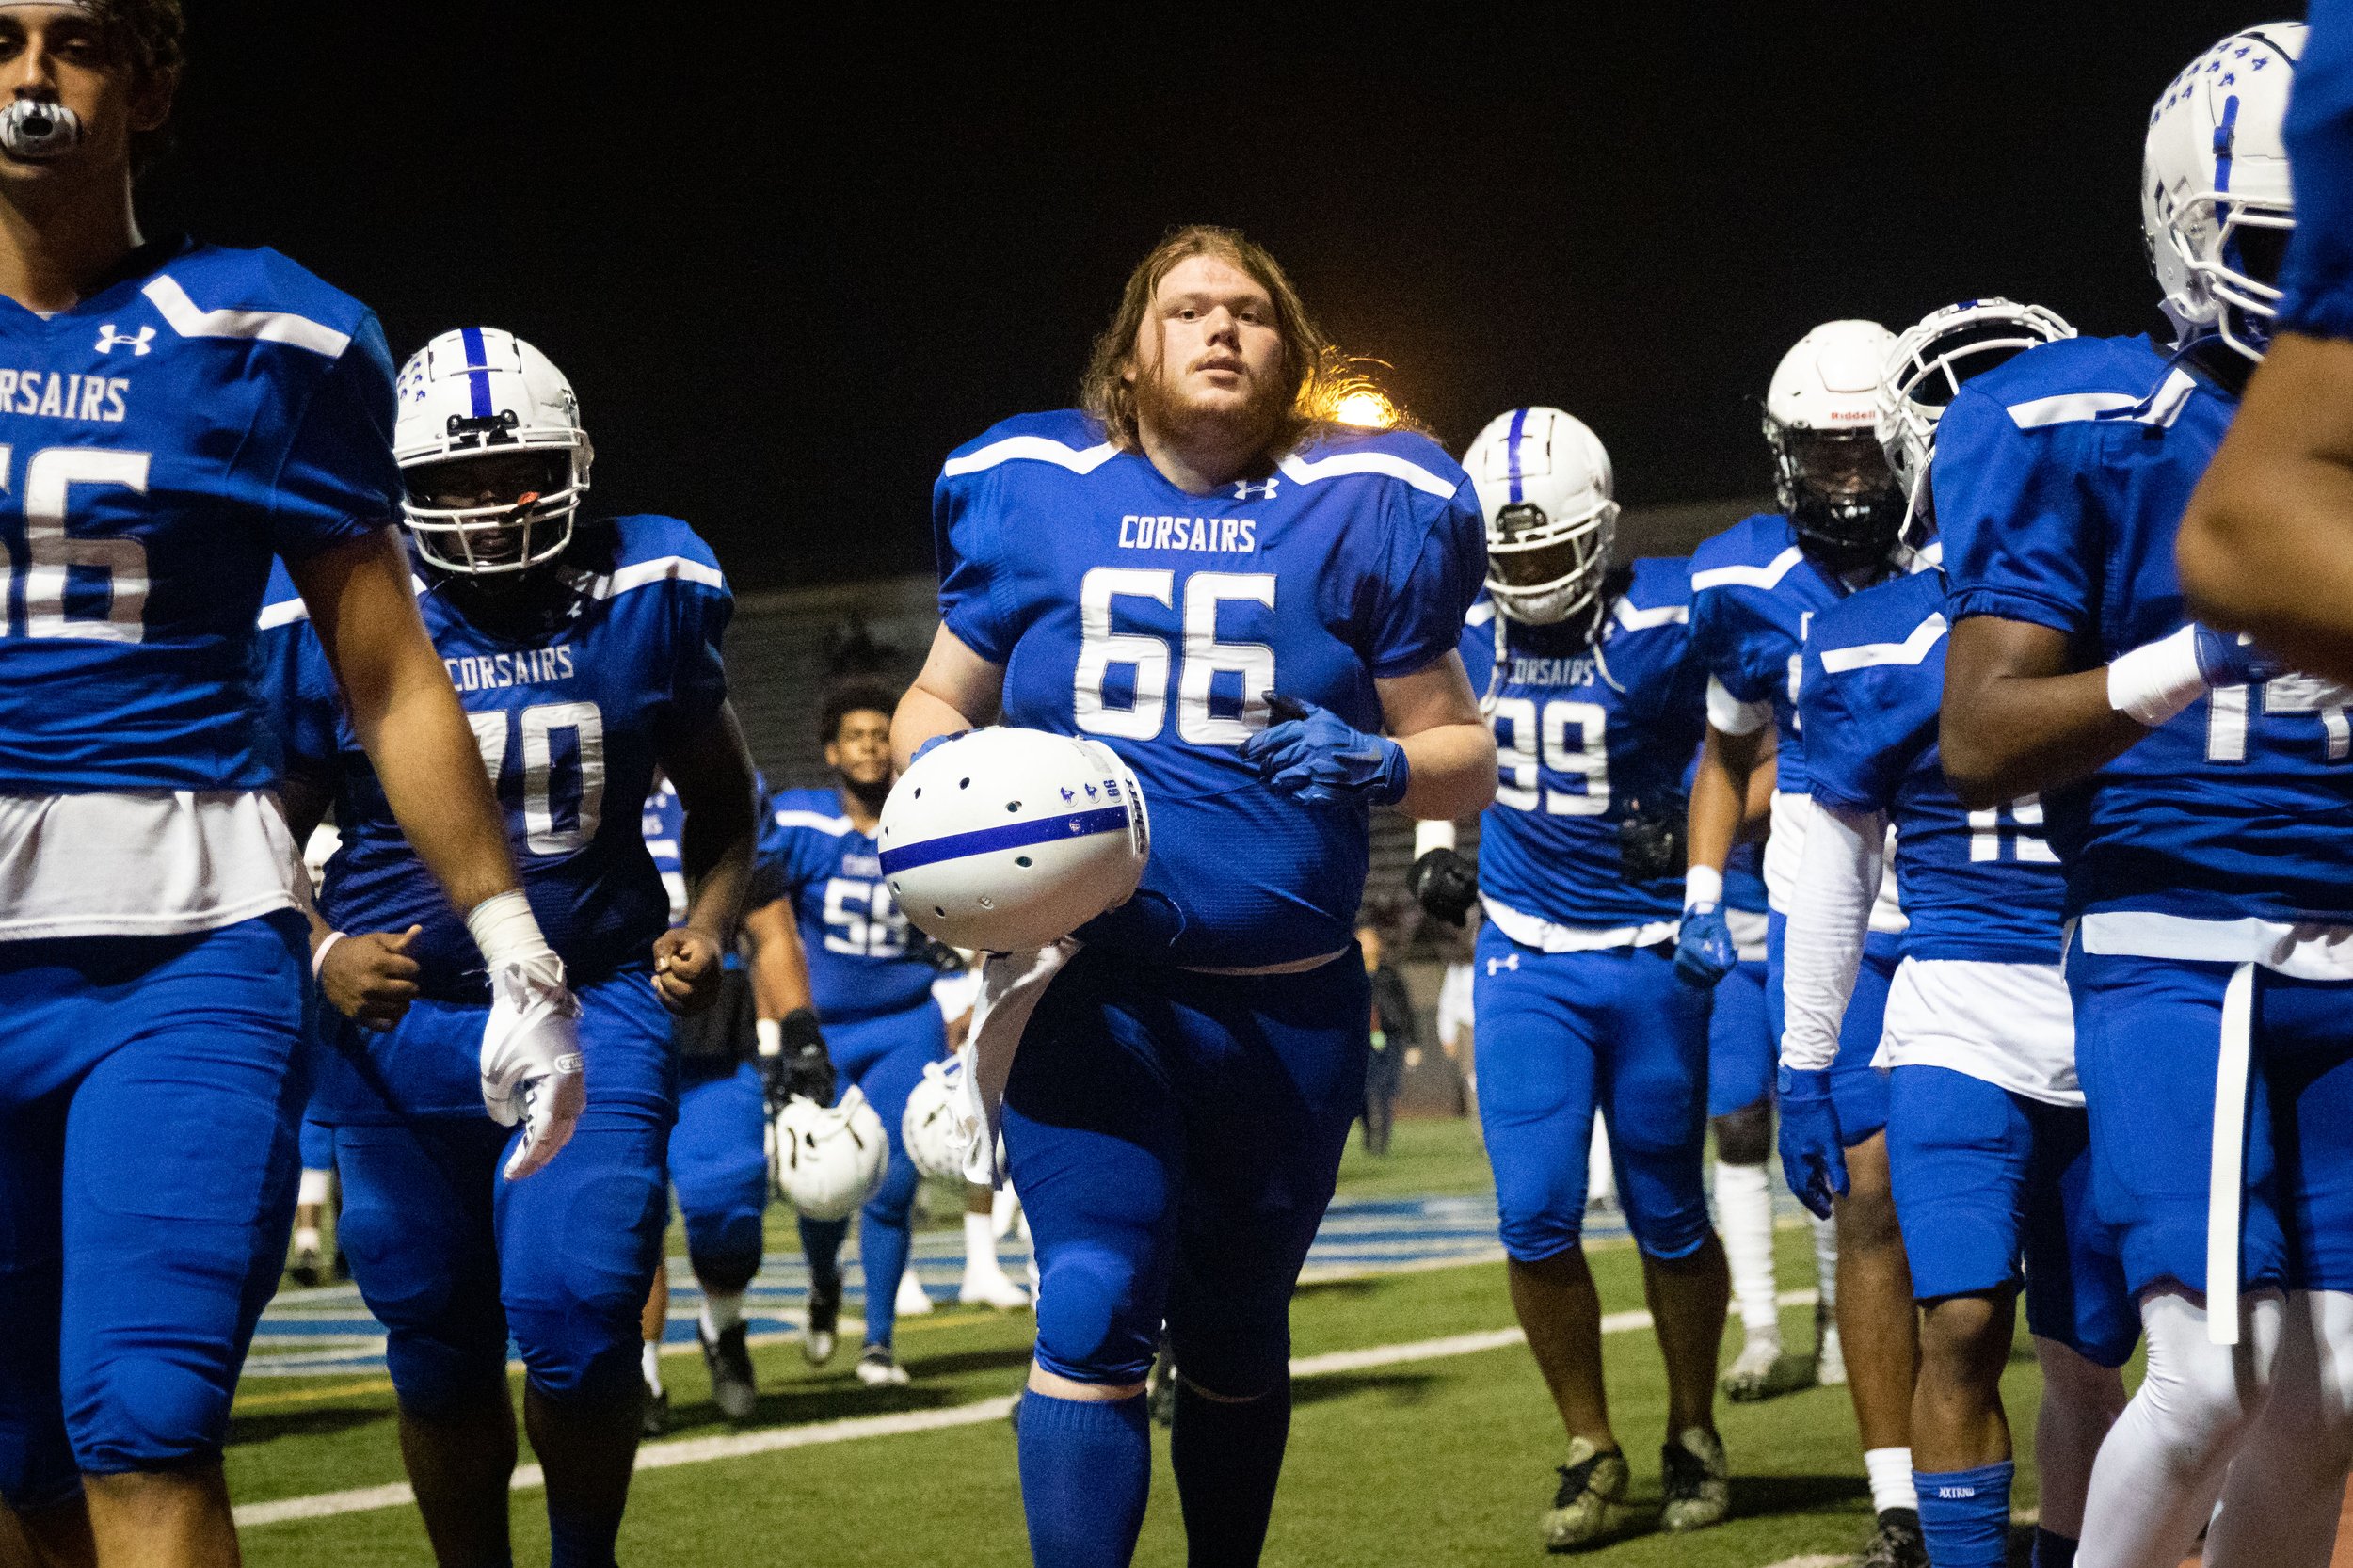  Santa Monica College Corsair offensive lineman Nick Mazzaro (66), along with the rest of his team, walking to the locker room during halftime in a recent home game against Moorpark College Raiders on Thursday, Oct. 13, 2022. The game went in favor o